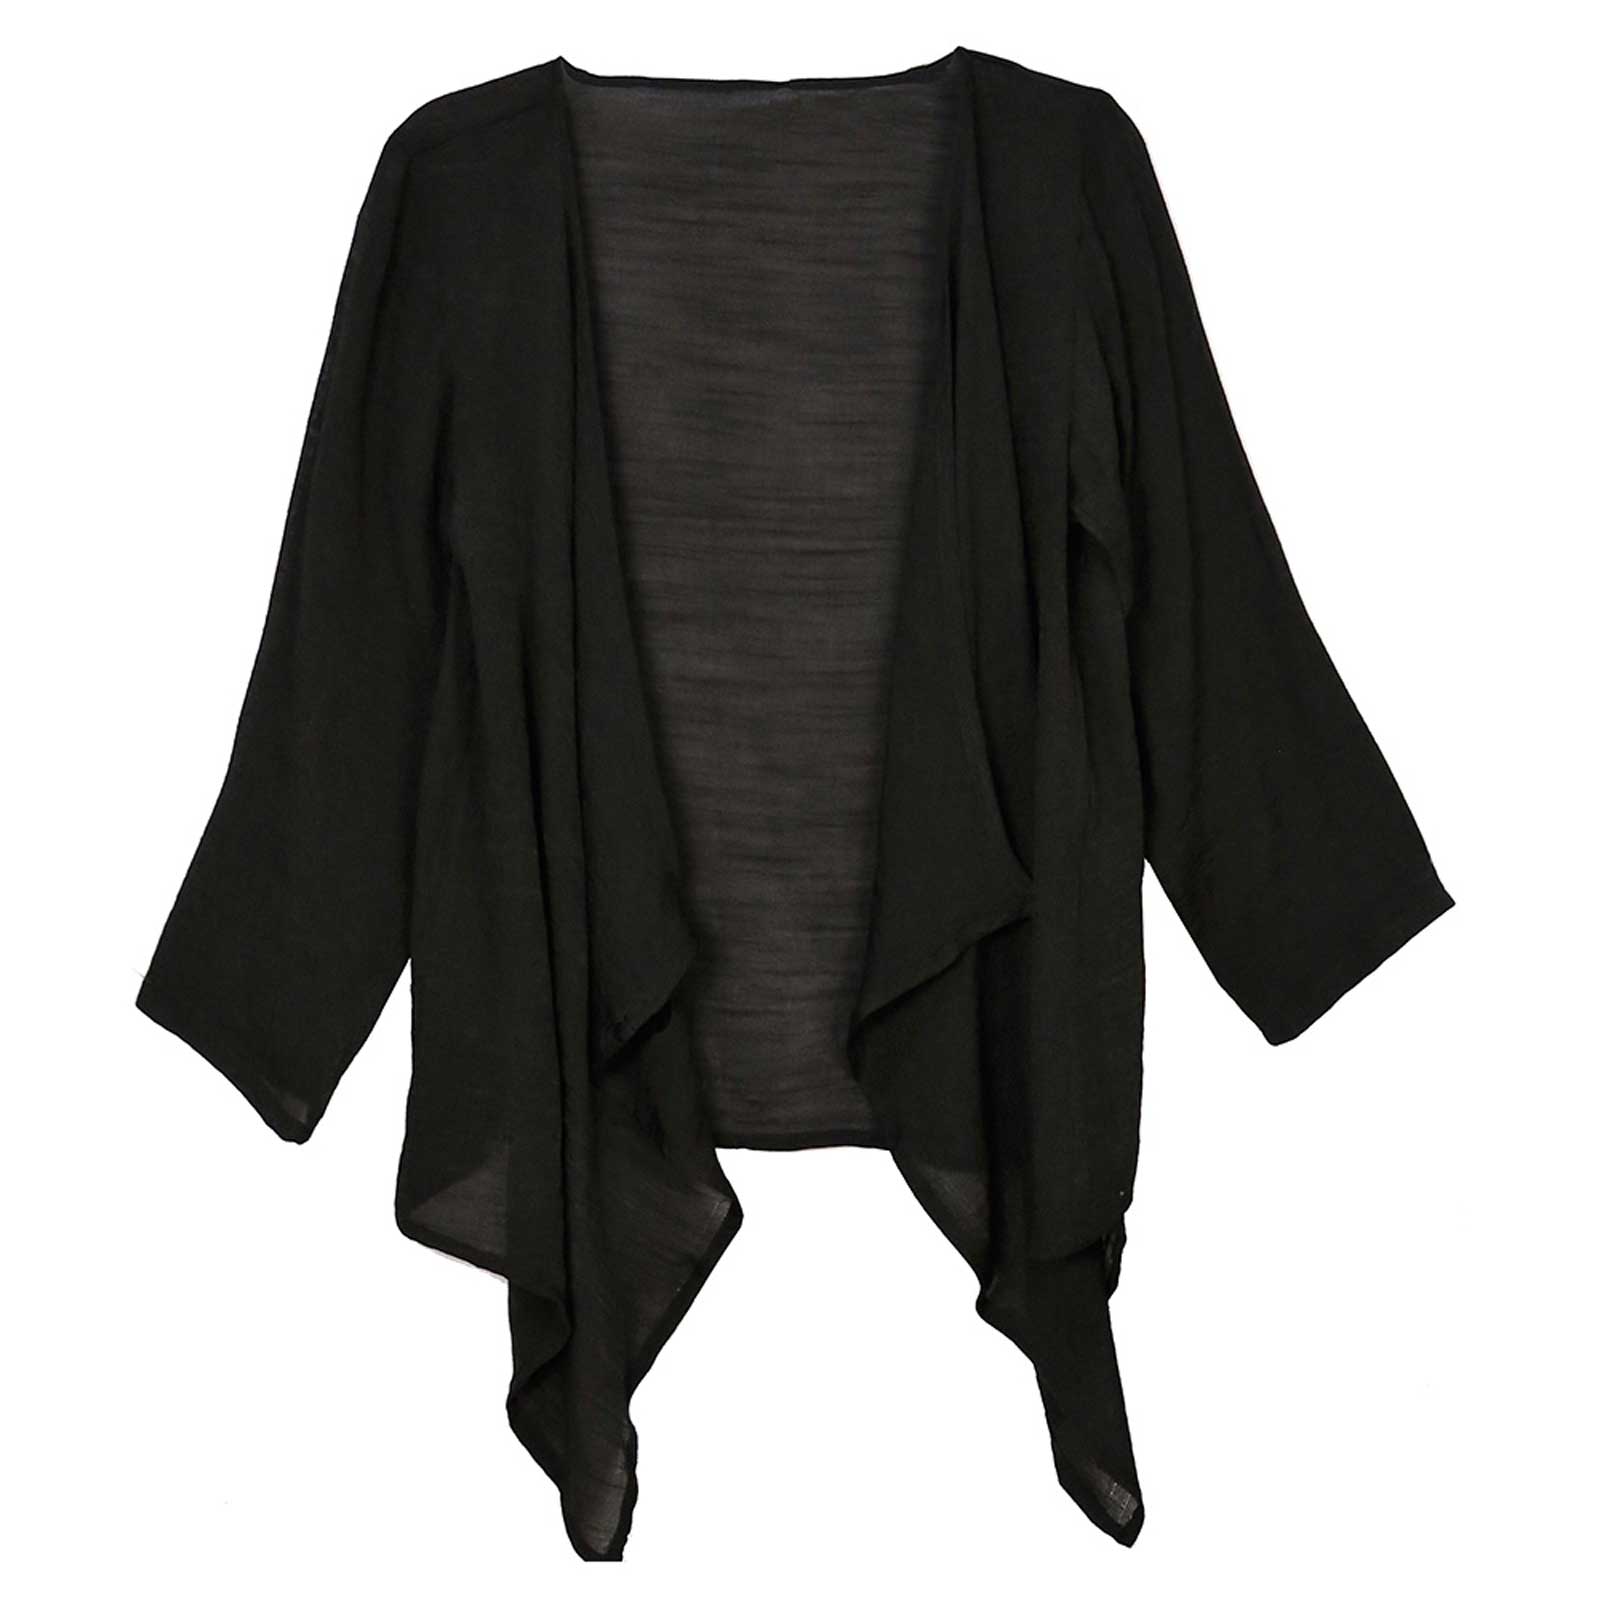 Black Front Tie Short Cardigan,  This Summer Cardigans are Made of high-quality material which is very soft and breathable for Women.  The added short edge gives better coverage with a feminine look. Front Tie Short Kimono suitable to wear with Jeans, Shorts, T-shirt, Midi Skirt and Dresses! Perfect for Vacation, Office, Home, Evening Party Spring, Summer and Fall.